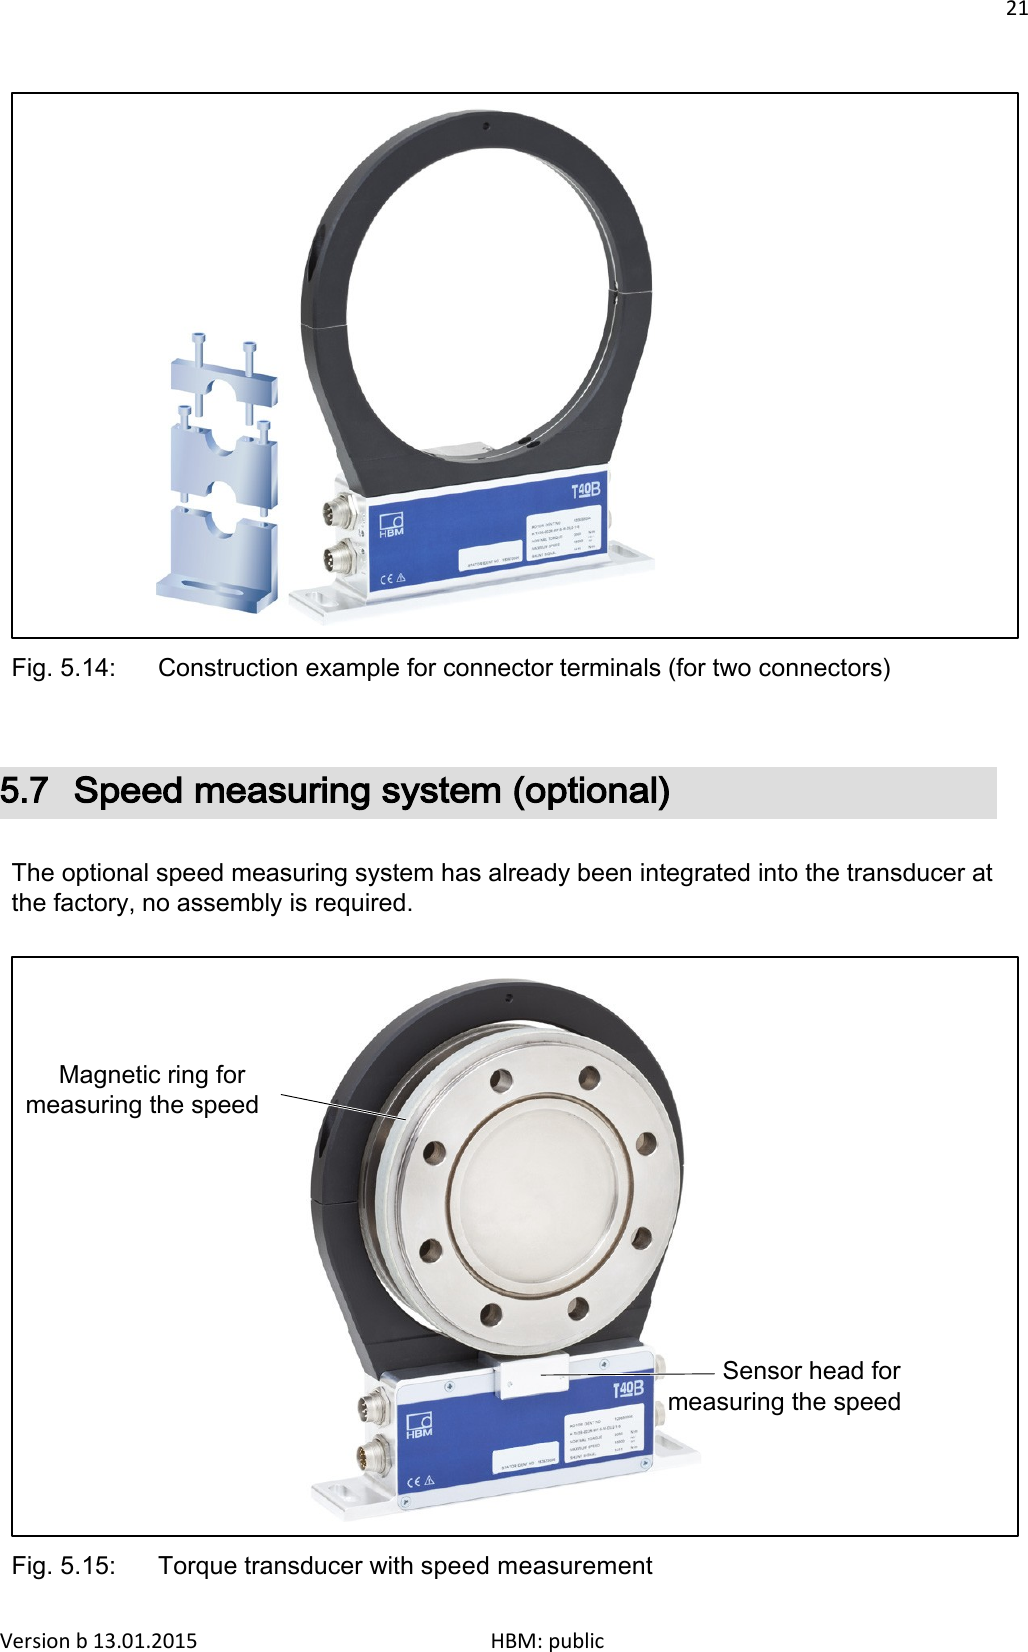 21                               Fig. 5.14:  Construction example for connector terminals (for two connectors)    5.7 Speed measuring system (optional)   The optional speed measuring system has already been integrated into the transducer at the factory, no assembly is required.        Magnetic ring for measuring the speed             Sensor head for measuring the speed       Fig. 5.15:  Torque transducer with speed measurement Version b 13.01.2015                              HBM: public 